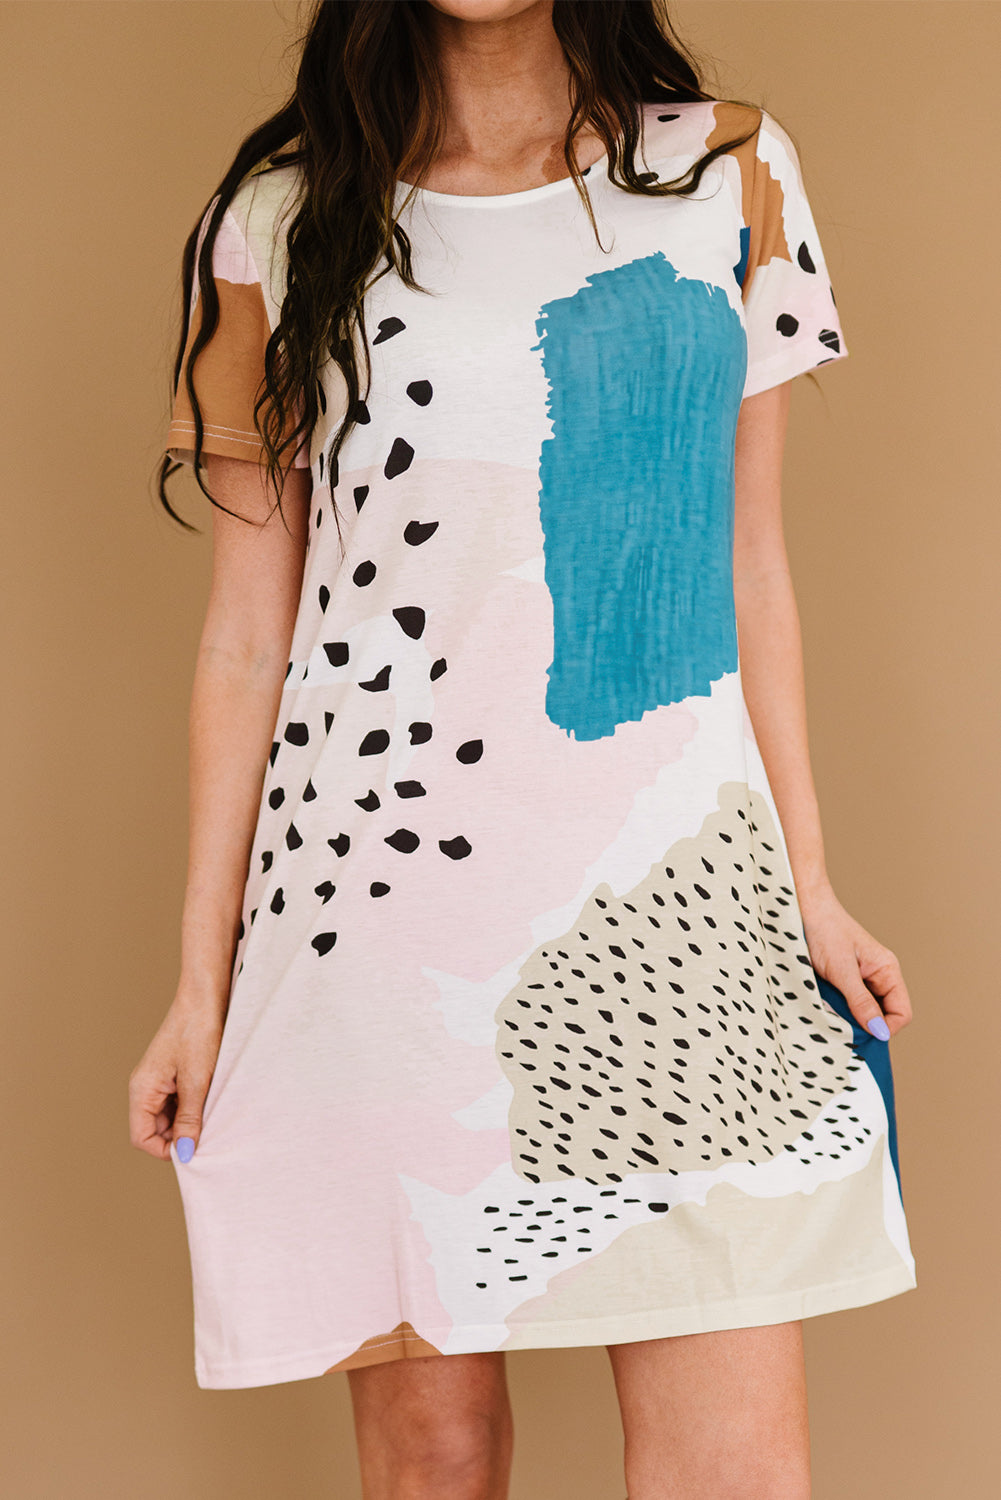 Tie Dye and Spotted Print Color Block Casual T Shirt Summer Dress